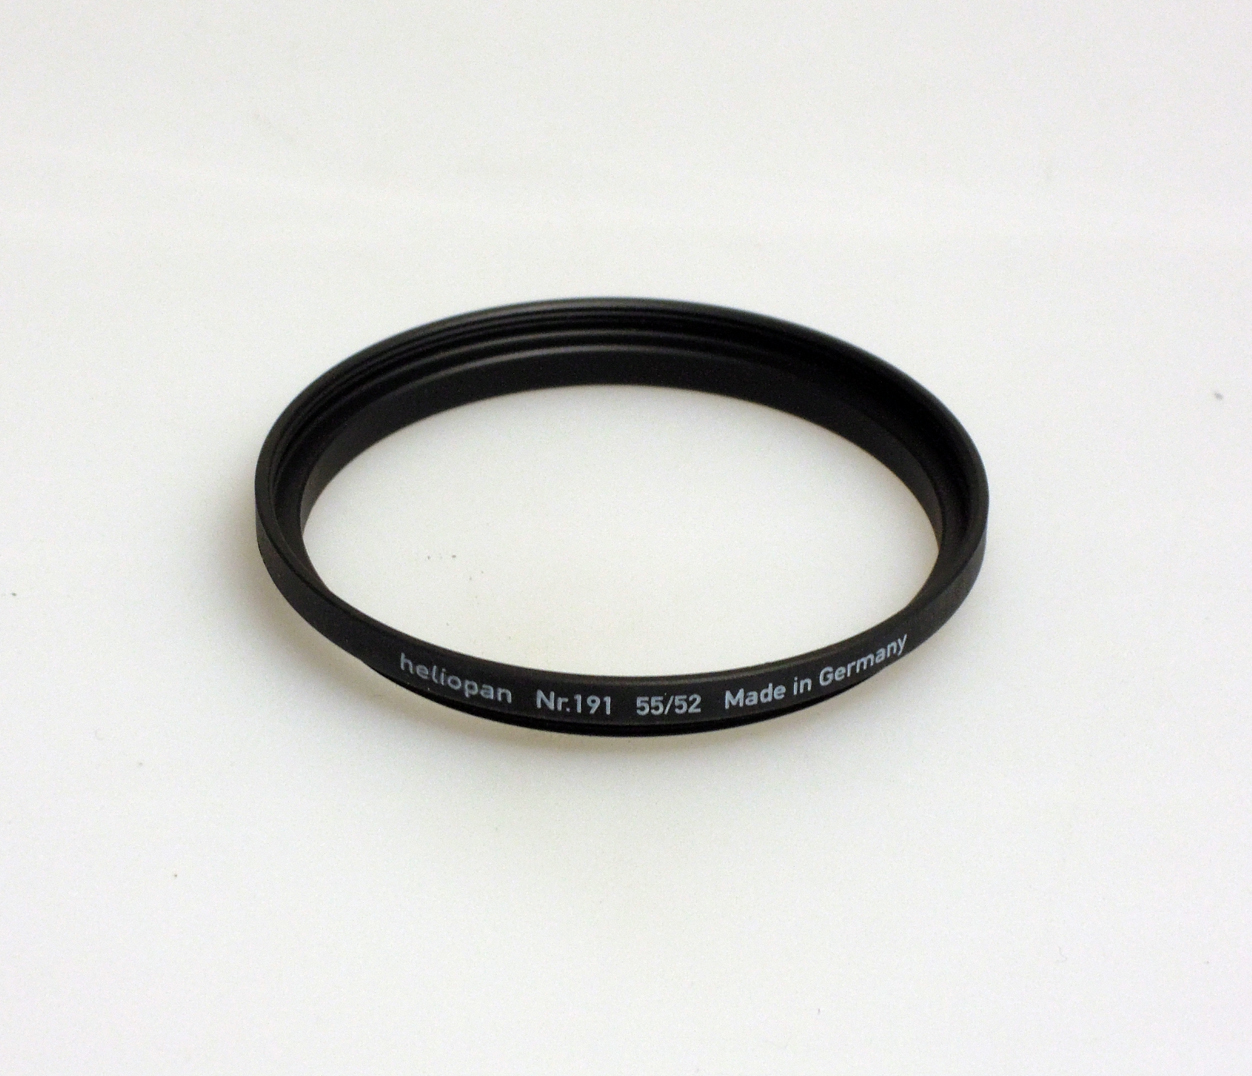 Highest Quality All Brass,German Made Brand New Heliopan 67-55mm Stepping Ring 